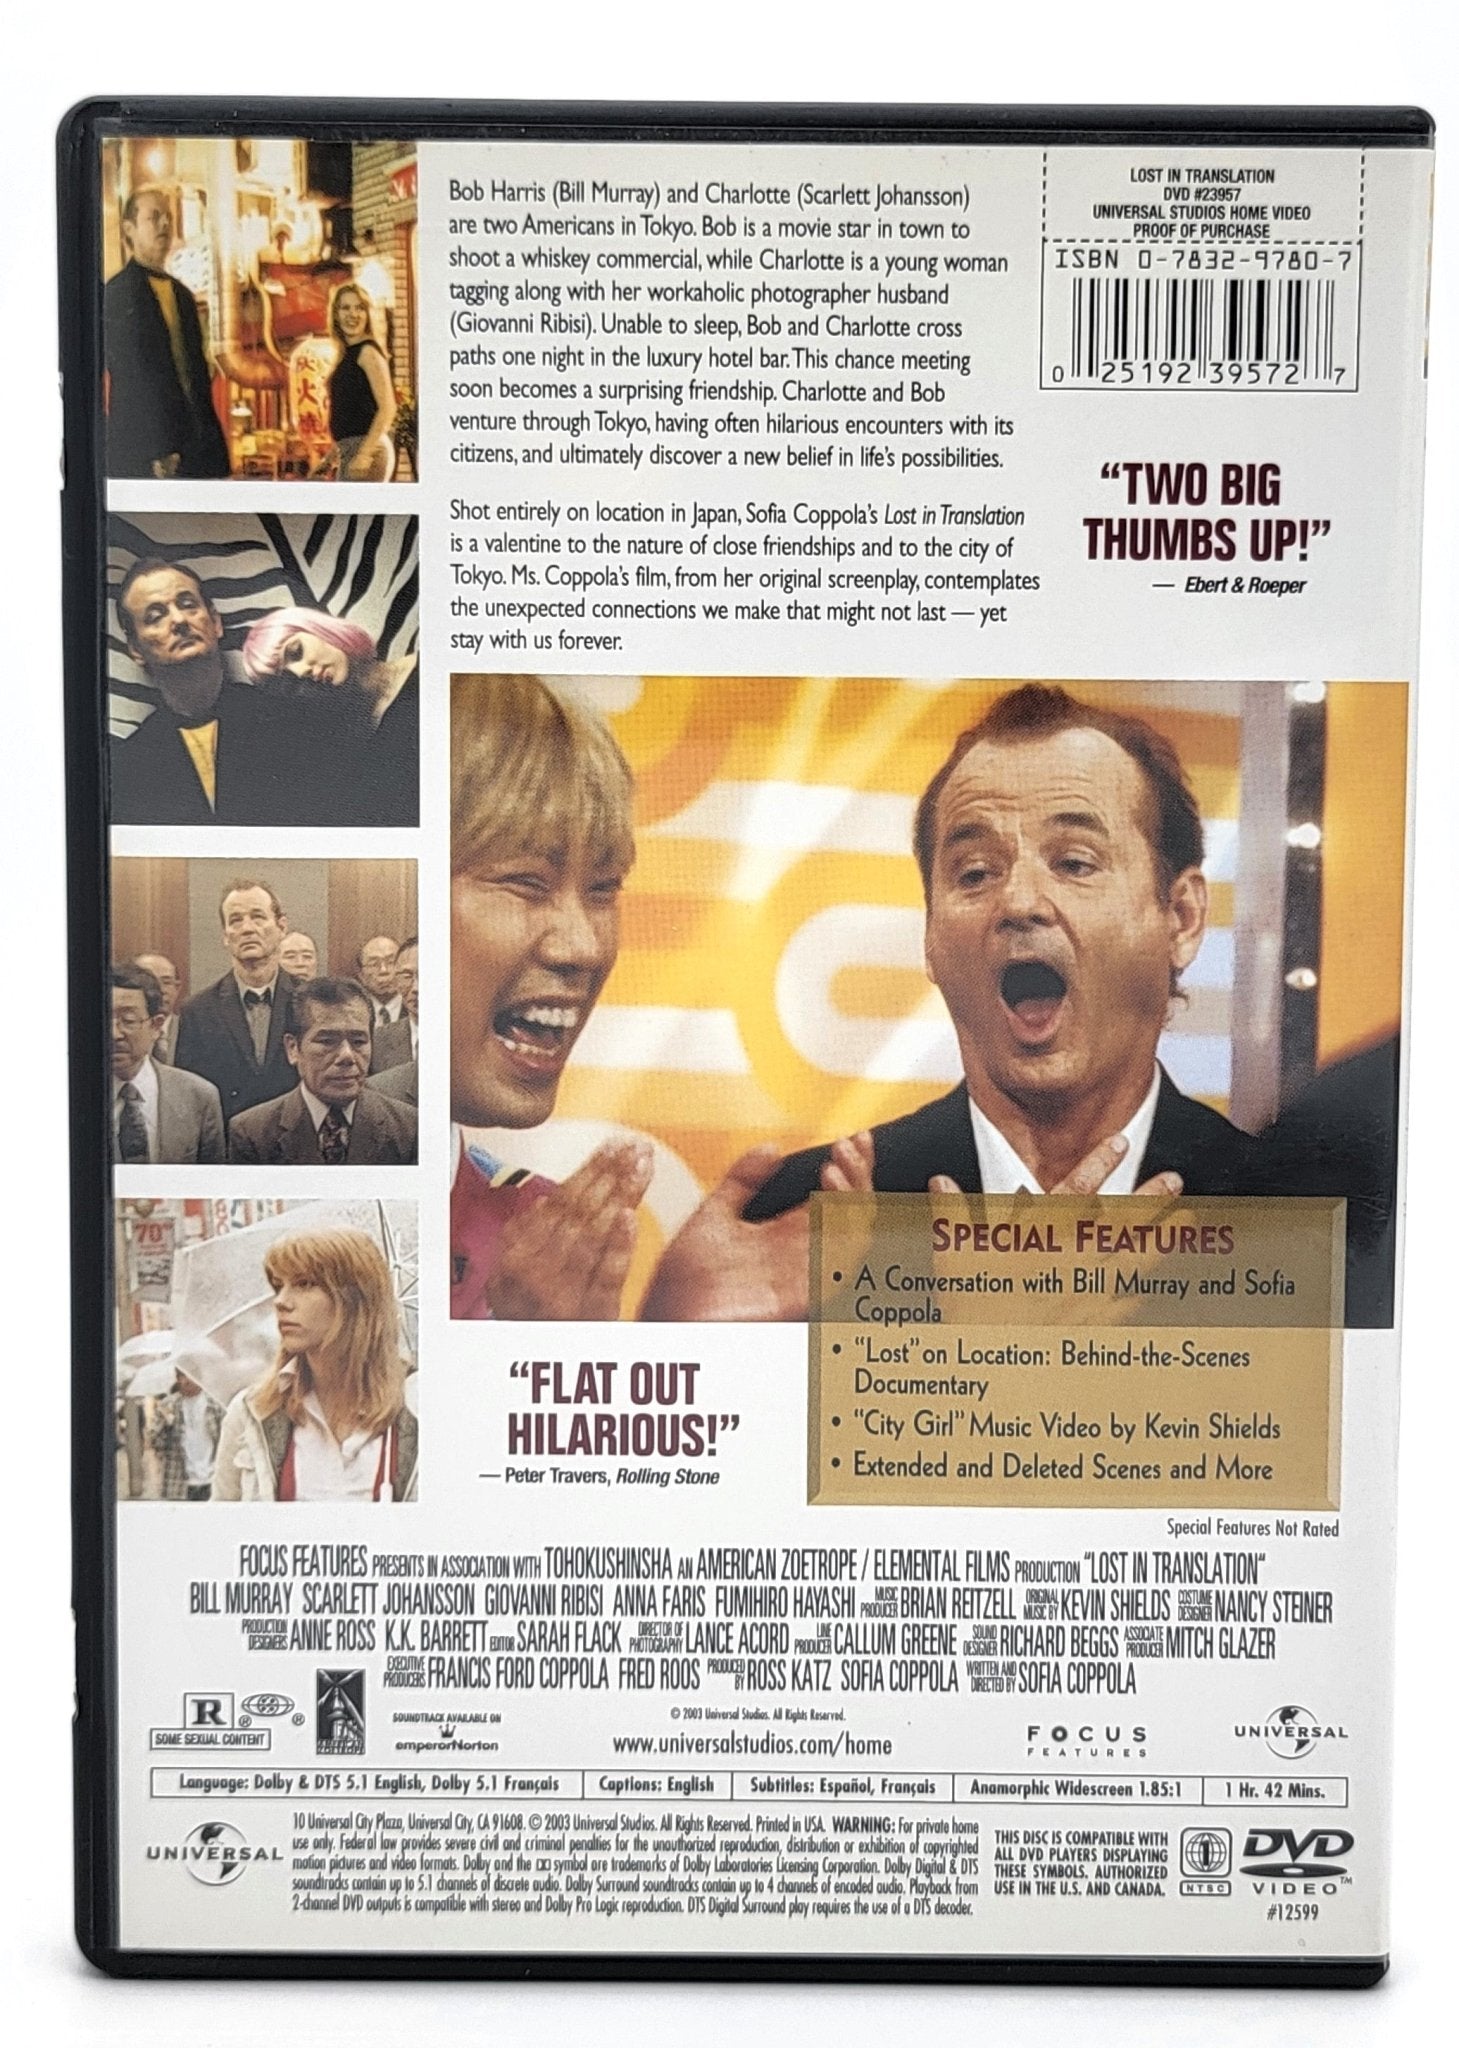 Universal Studios Home Entertainment - Lost in Translation | DVD | Widescreen - DVD - Steady Bunny Shop